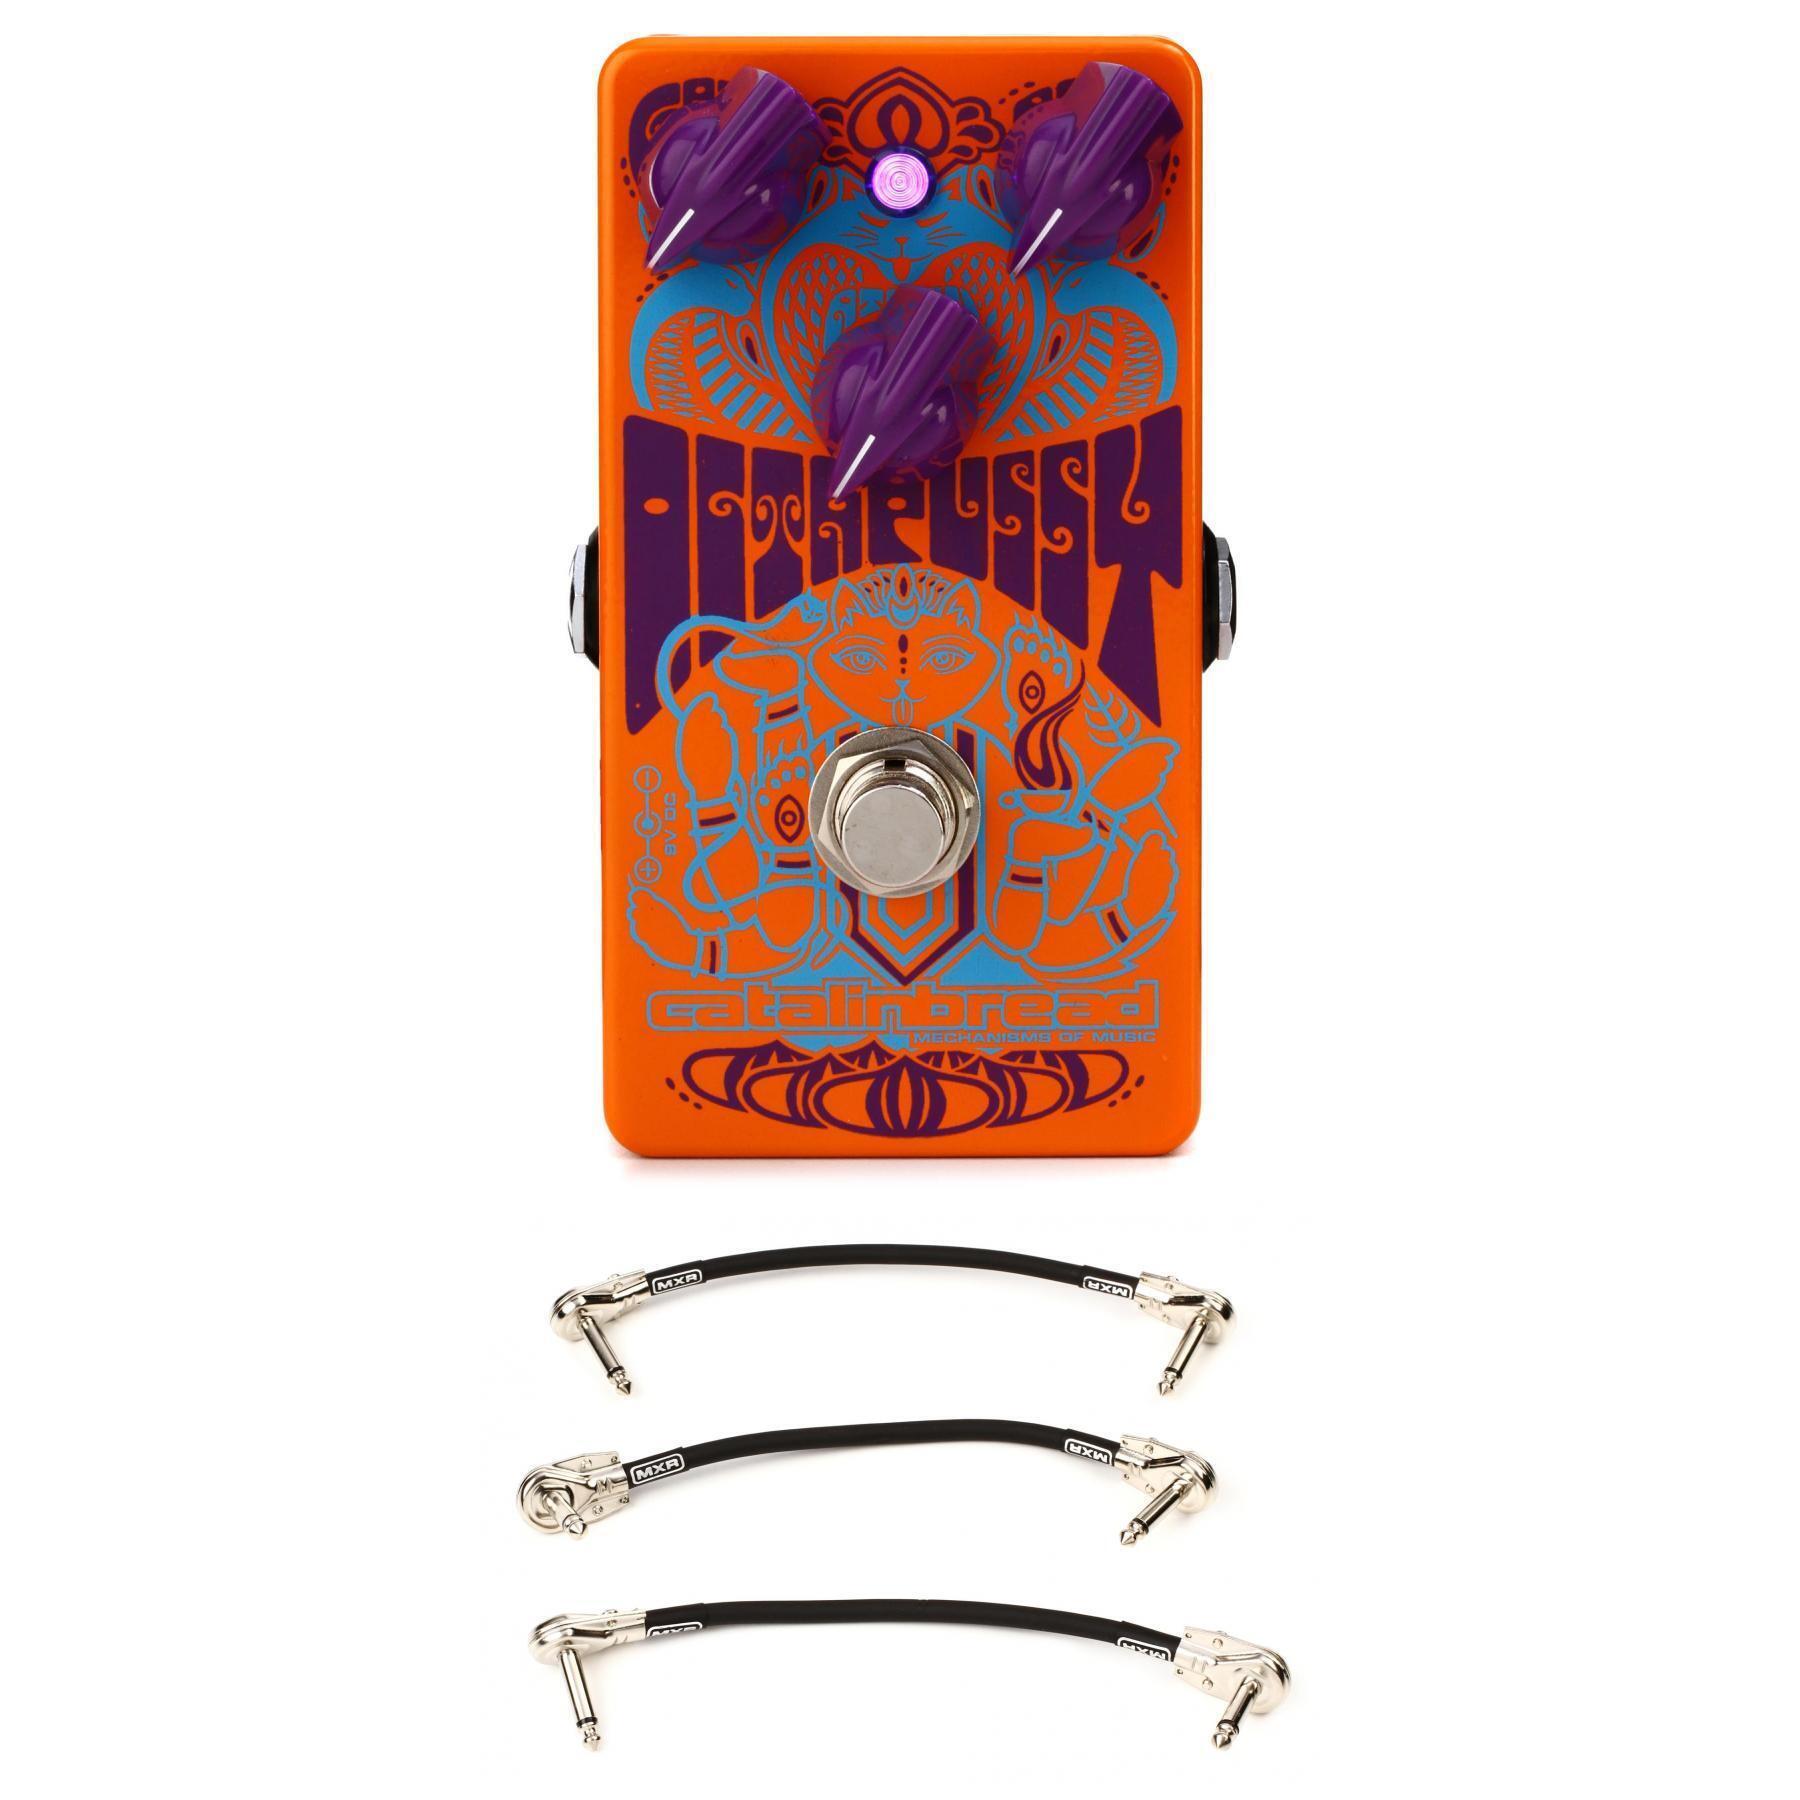 Catalinbread Octapussy Octave Fuzz Pedal | Sweetwater